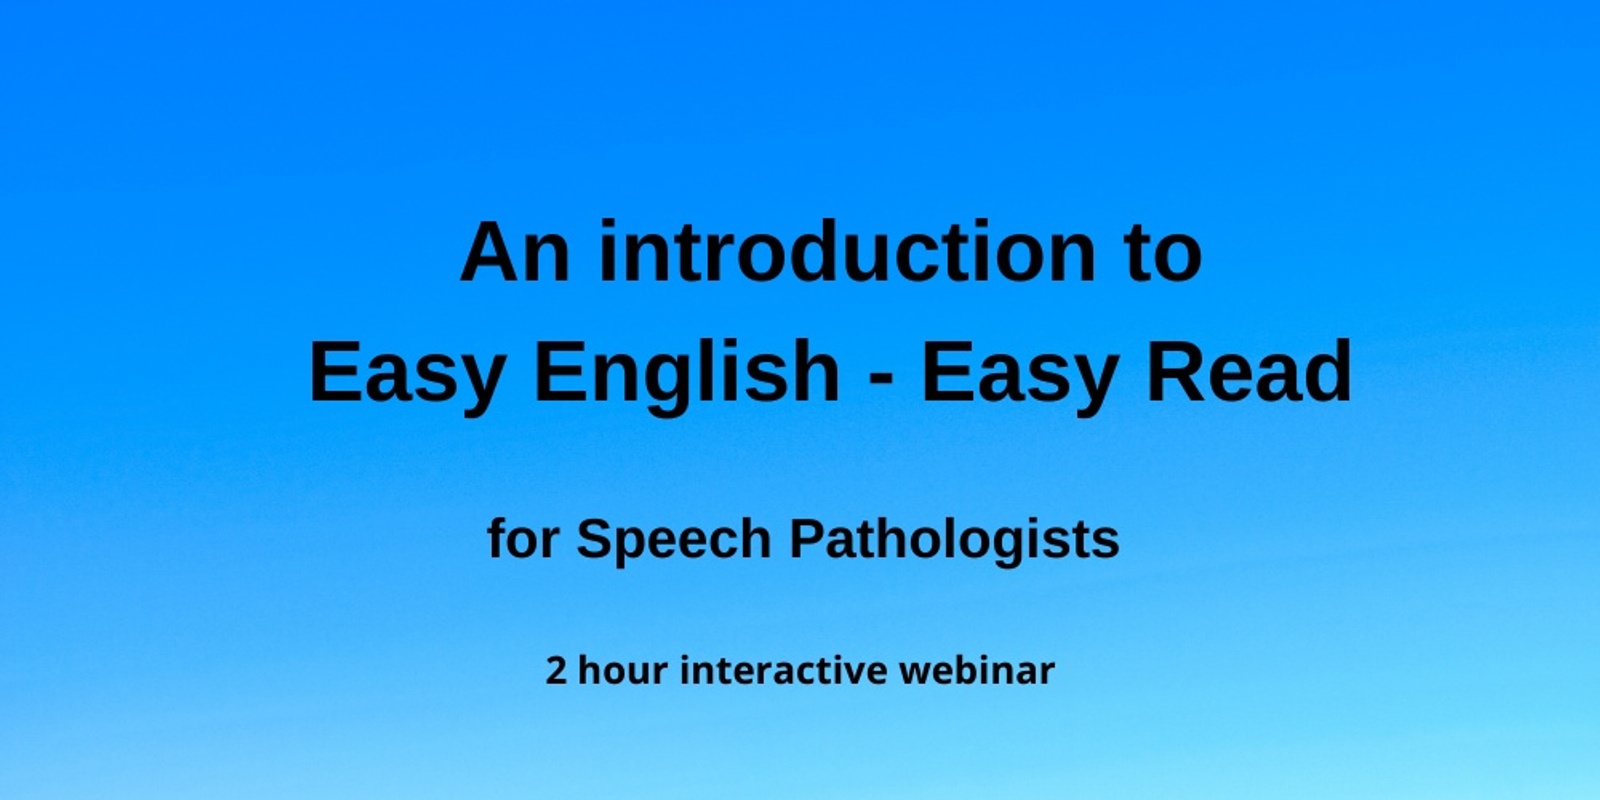 Banner image for An introduction to Easy English - Easy Read for Speech Pathologists